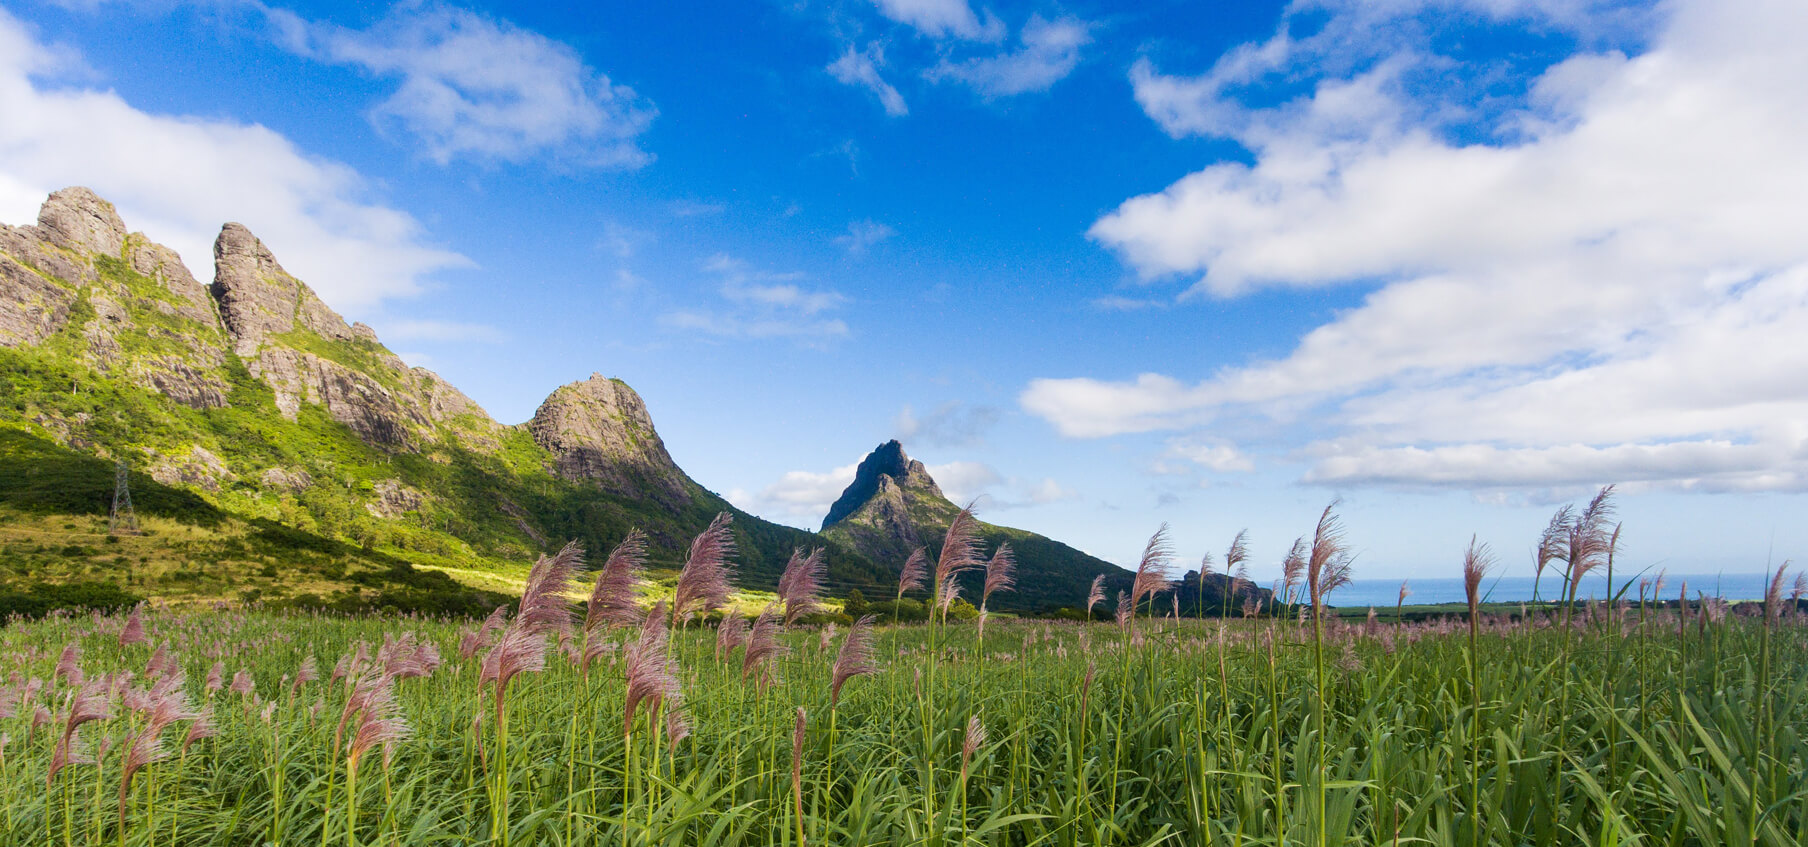 Harmonie: A Pioneering Sustainable Project in Mauritius